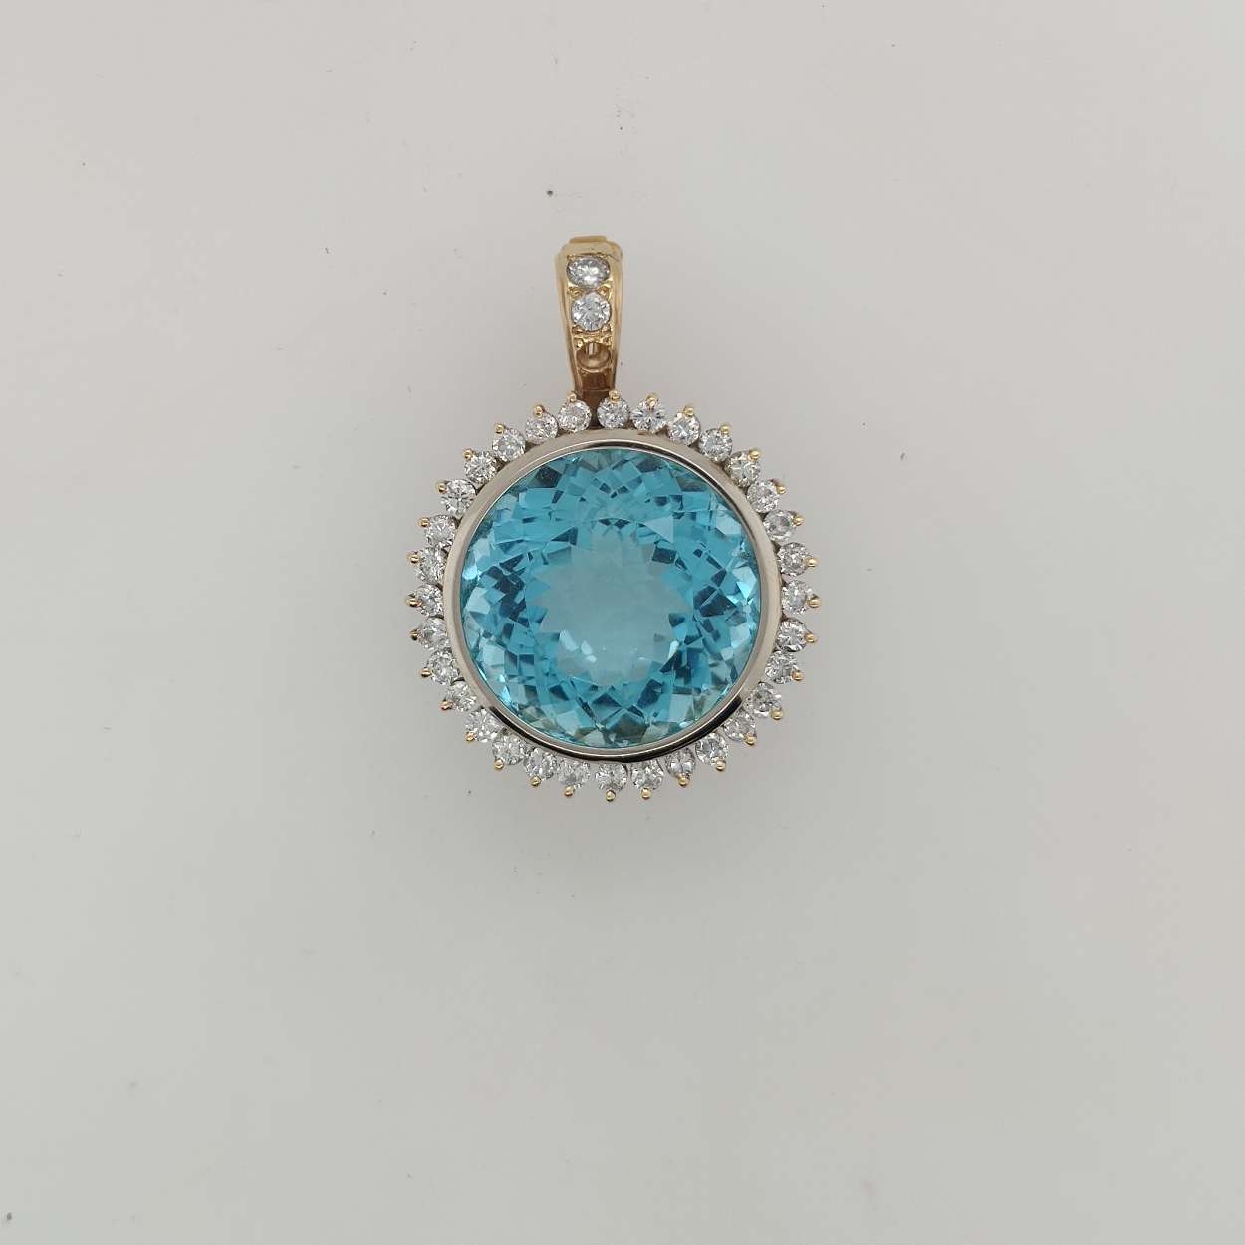 14K Yellow Gold Enhancer/Pendant with 20mm Round Aquamarine in a Circular Basket Setting with Diamond Halo